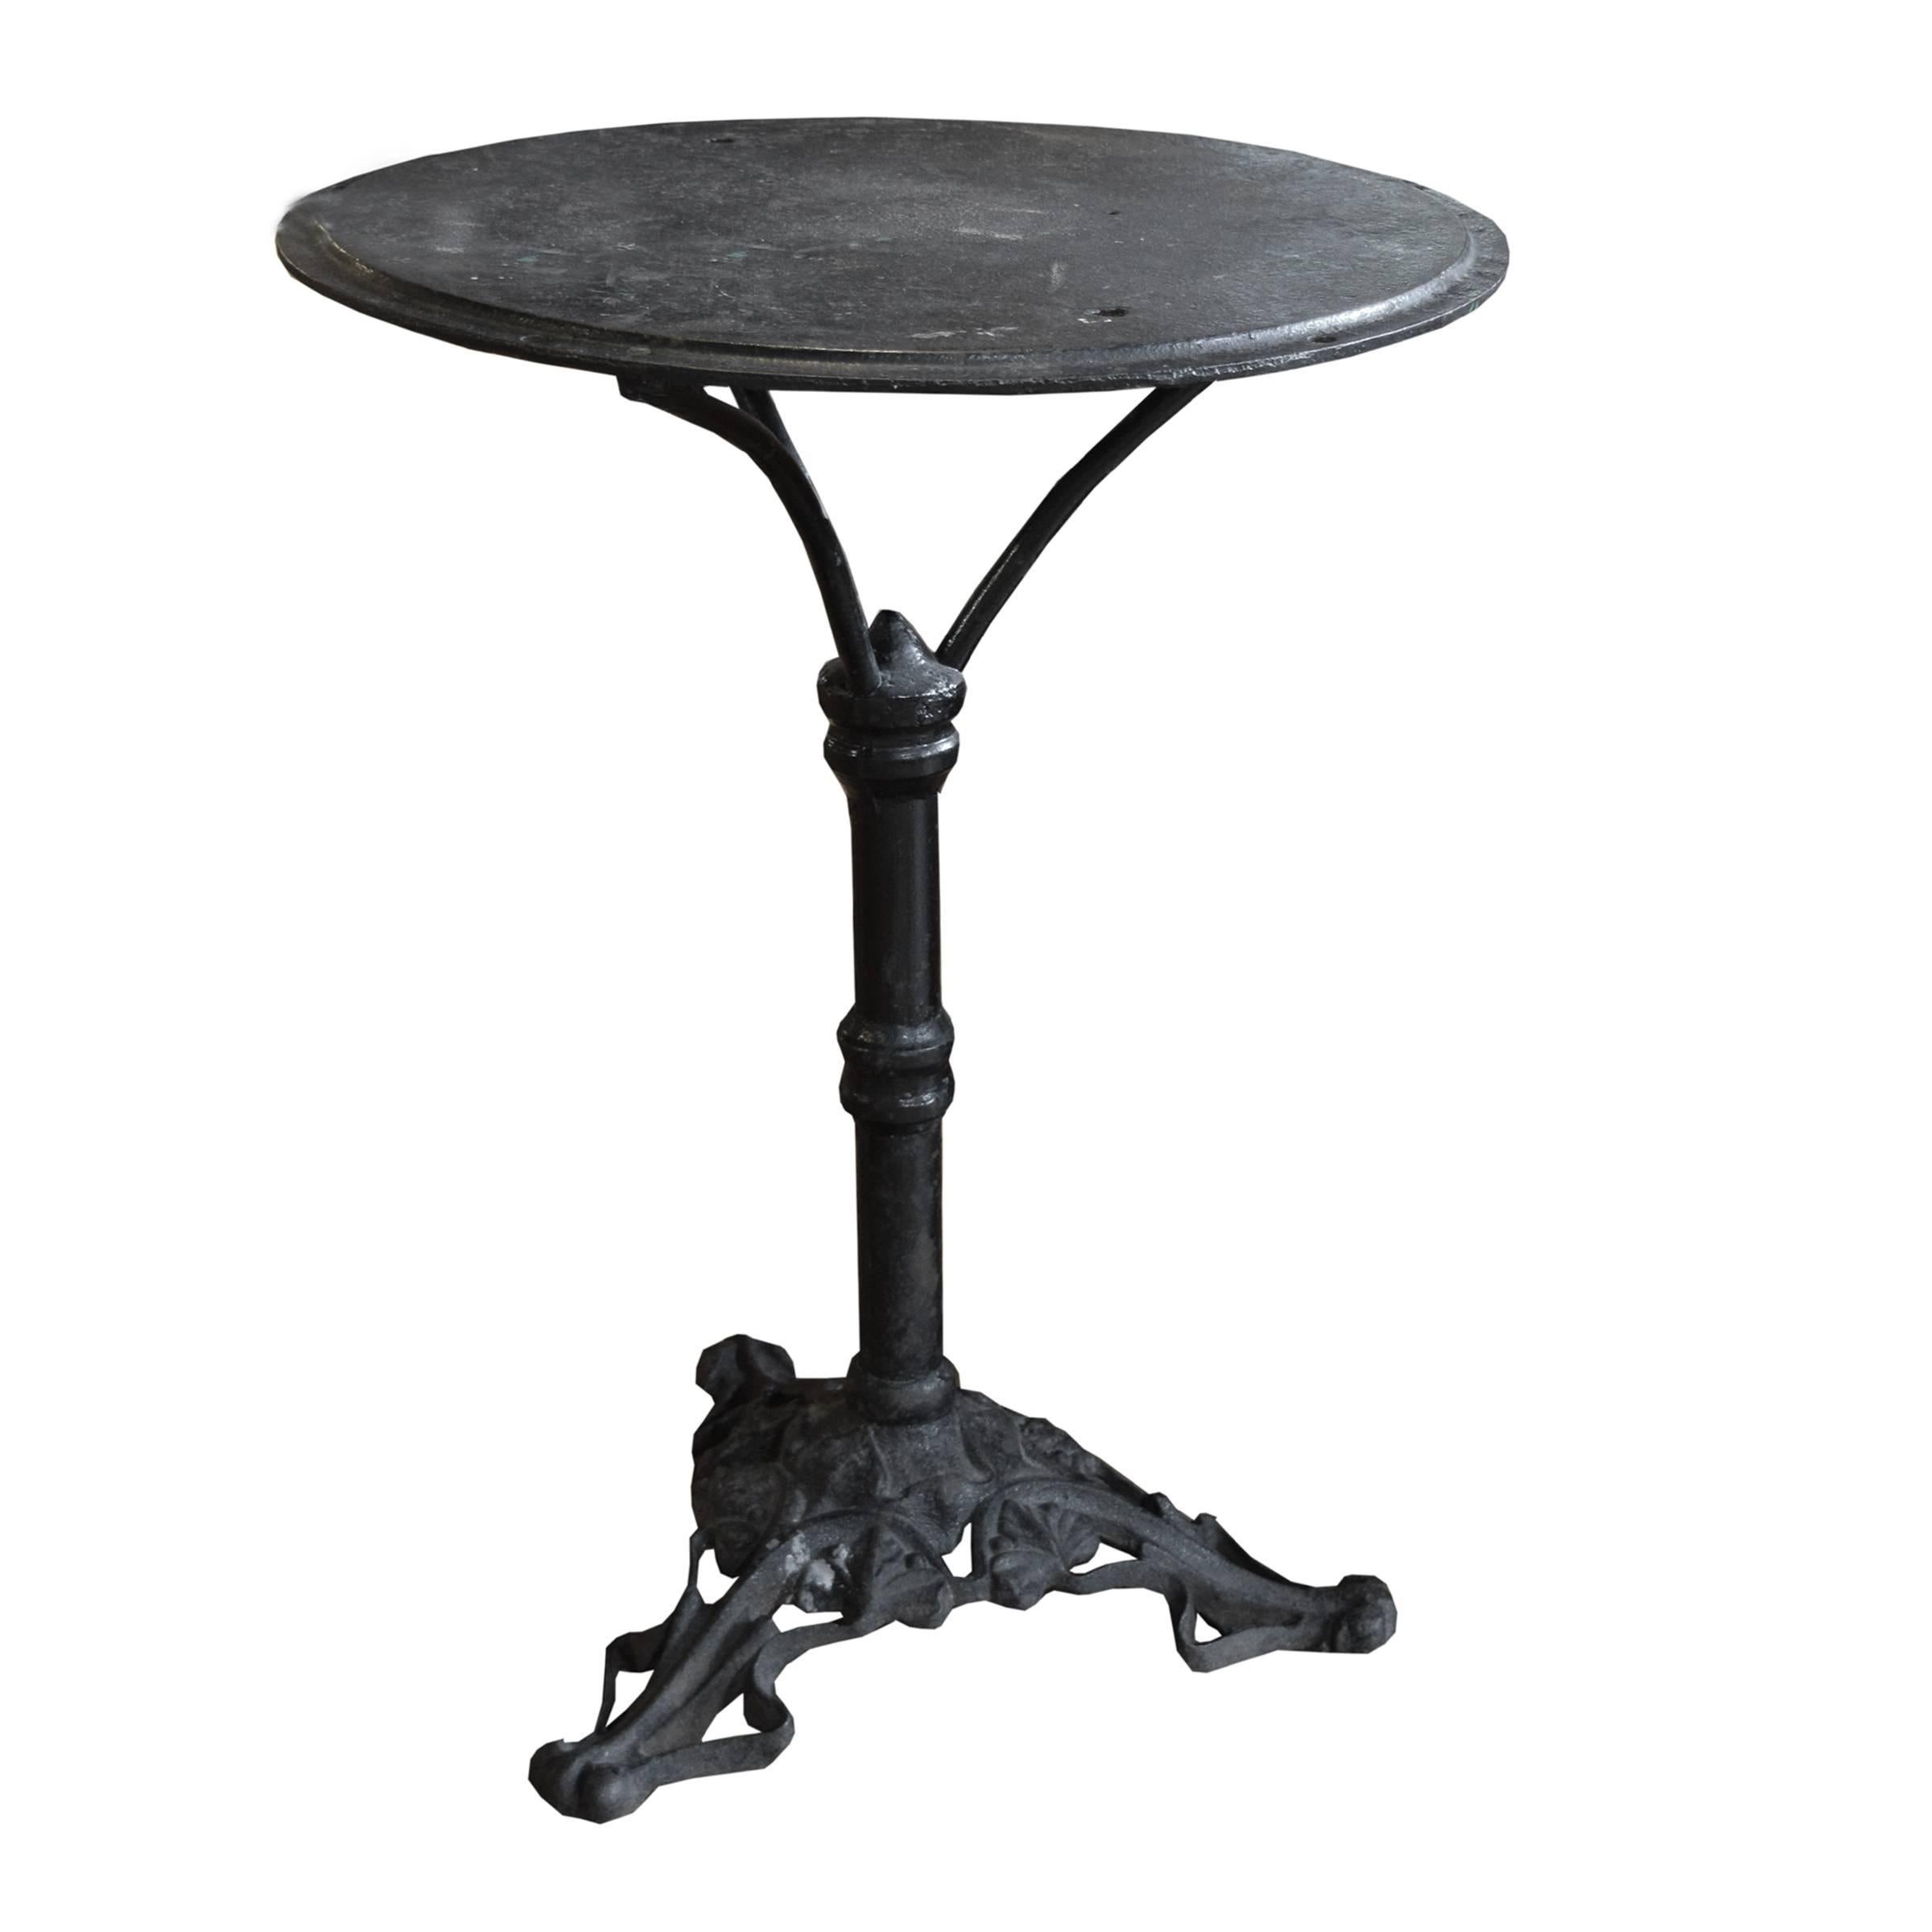 A fun French cast iron cafe table with a circular top raised on a pedestal base, ending on an Art Nouveau leaf and vine pattern tripod base, circa 1910.
  